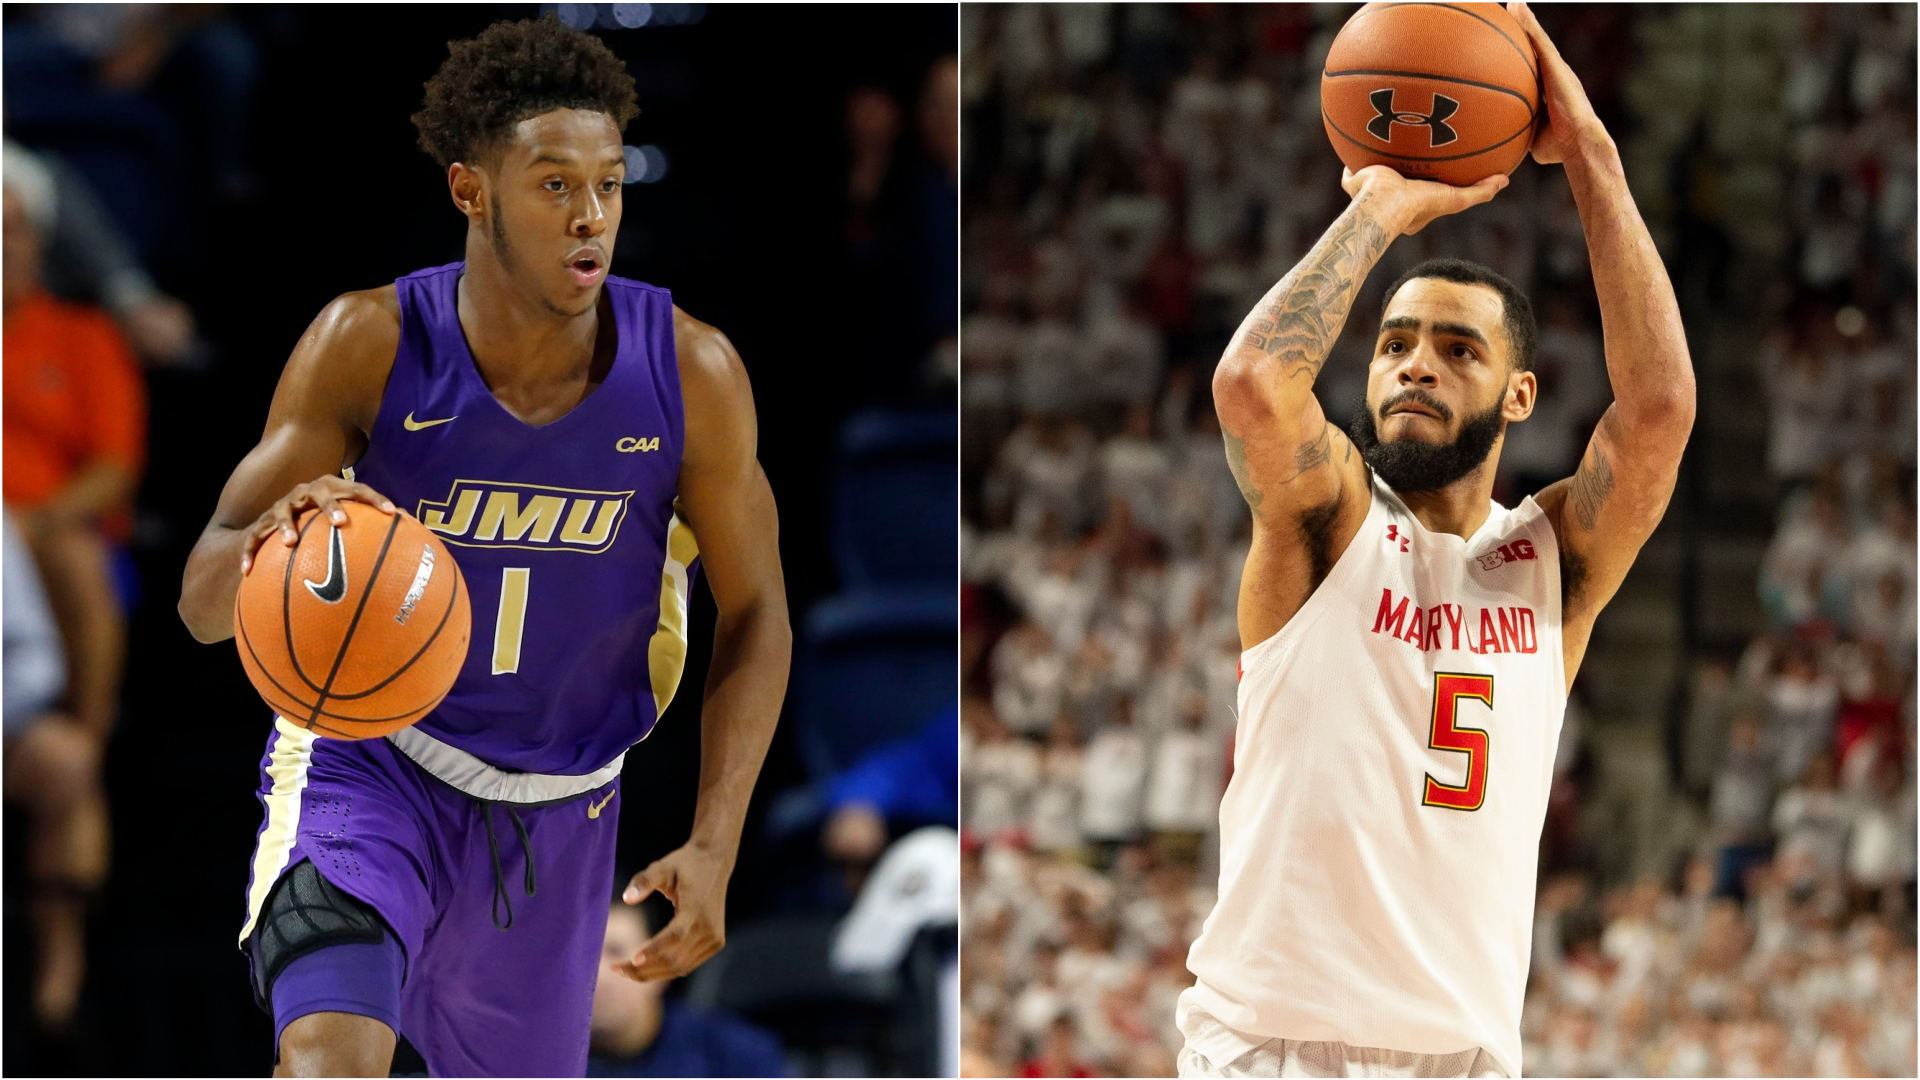 How to Watch Maryland Vs. James Madison Men's Basketball